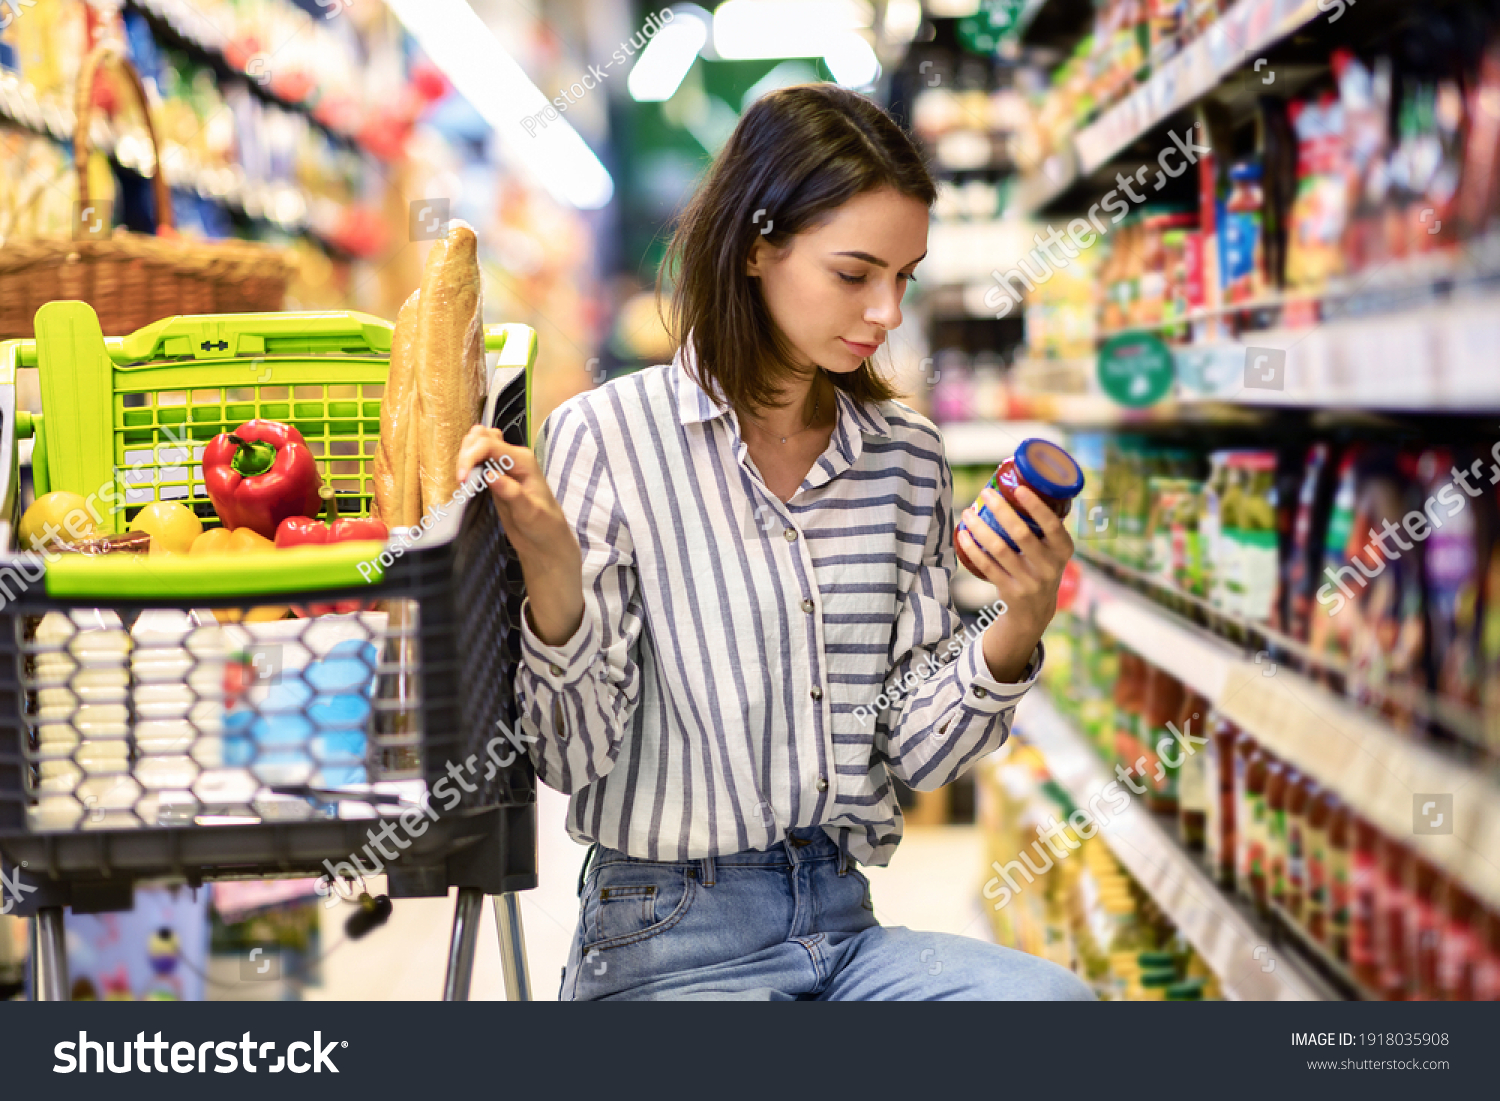 Consumption And Consumerism. Portrait Of Young Woman With Shopping Cart In Market Buying Groceries Food Taking Products From Shelves In Store, Holding Glass Jar Of Sauce, Checking Label Or Expiry Date #1918035908